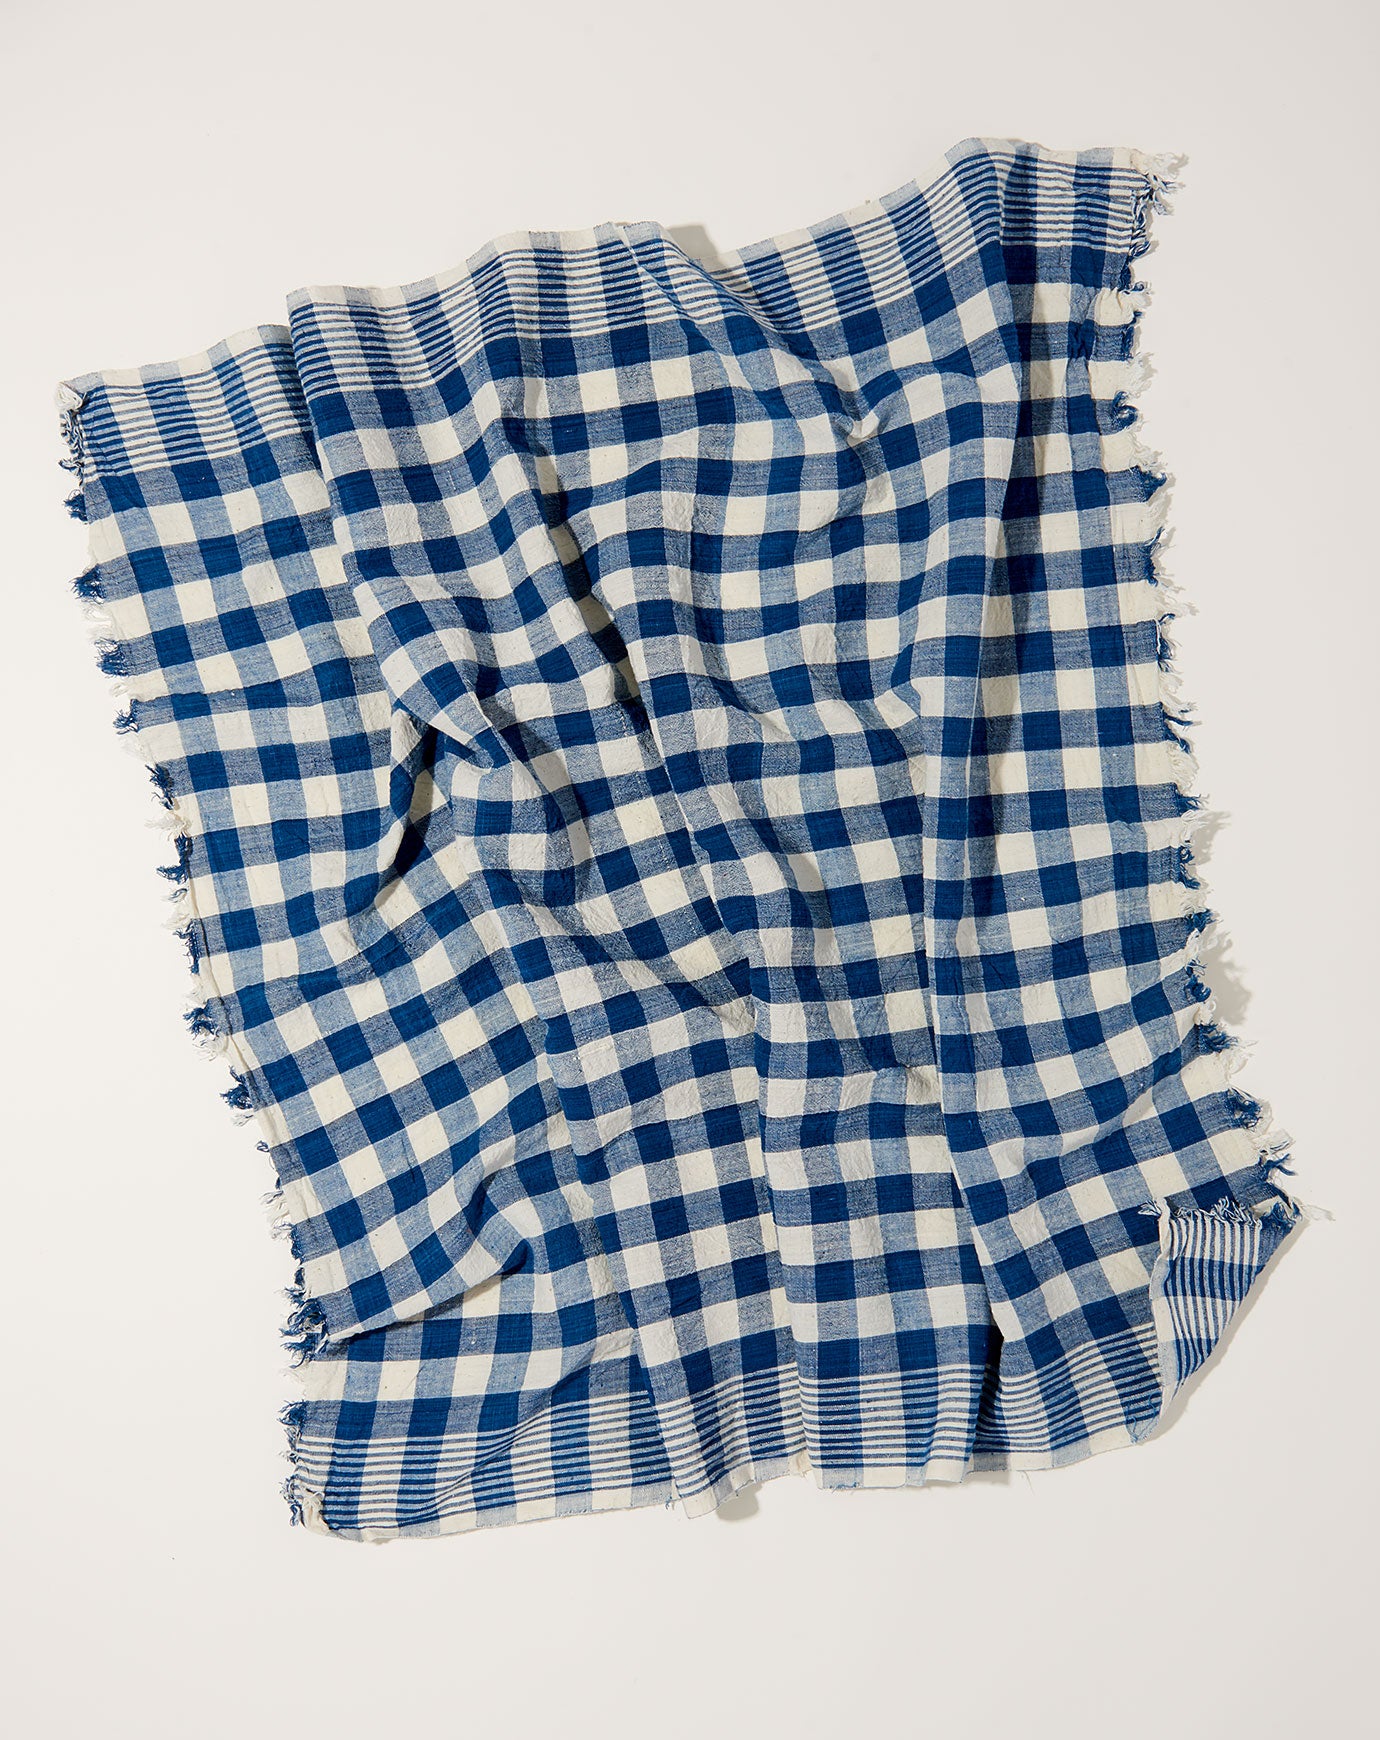 Auntie Oti Natural Dye Check Towel in Blue